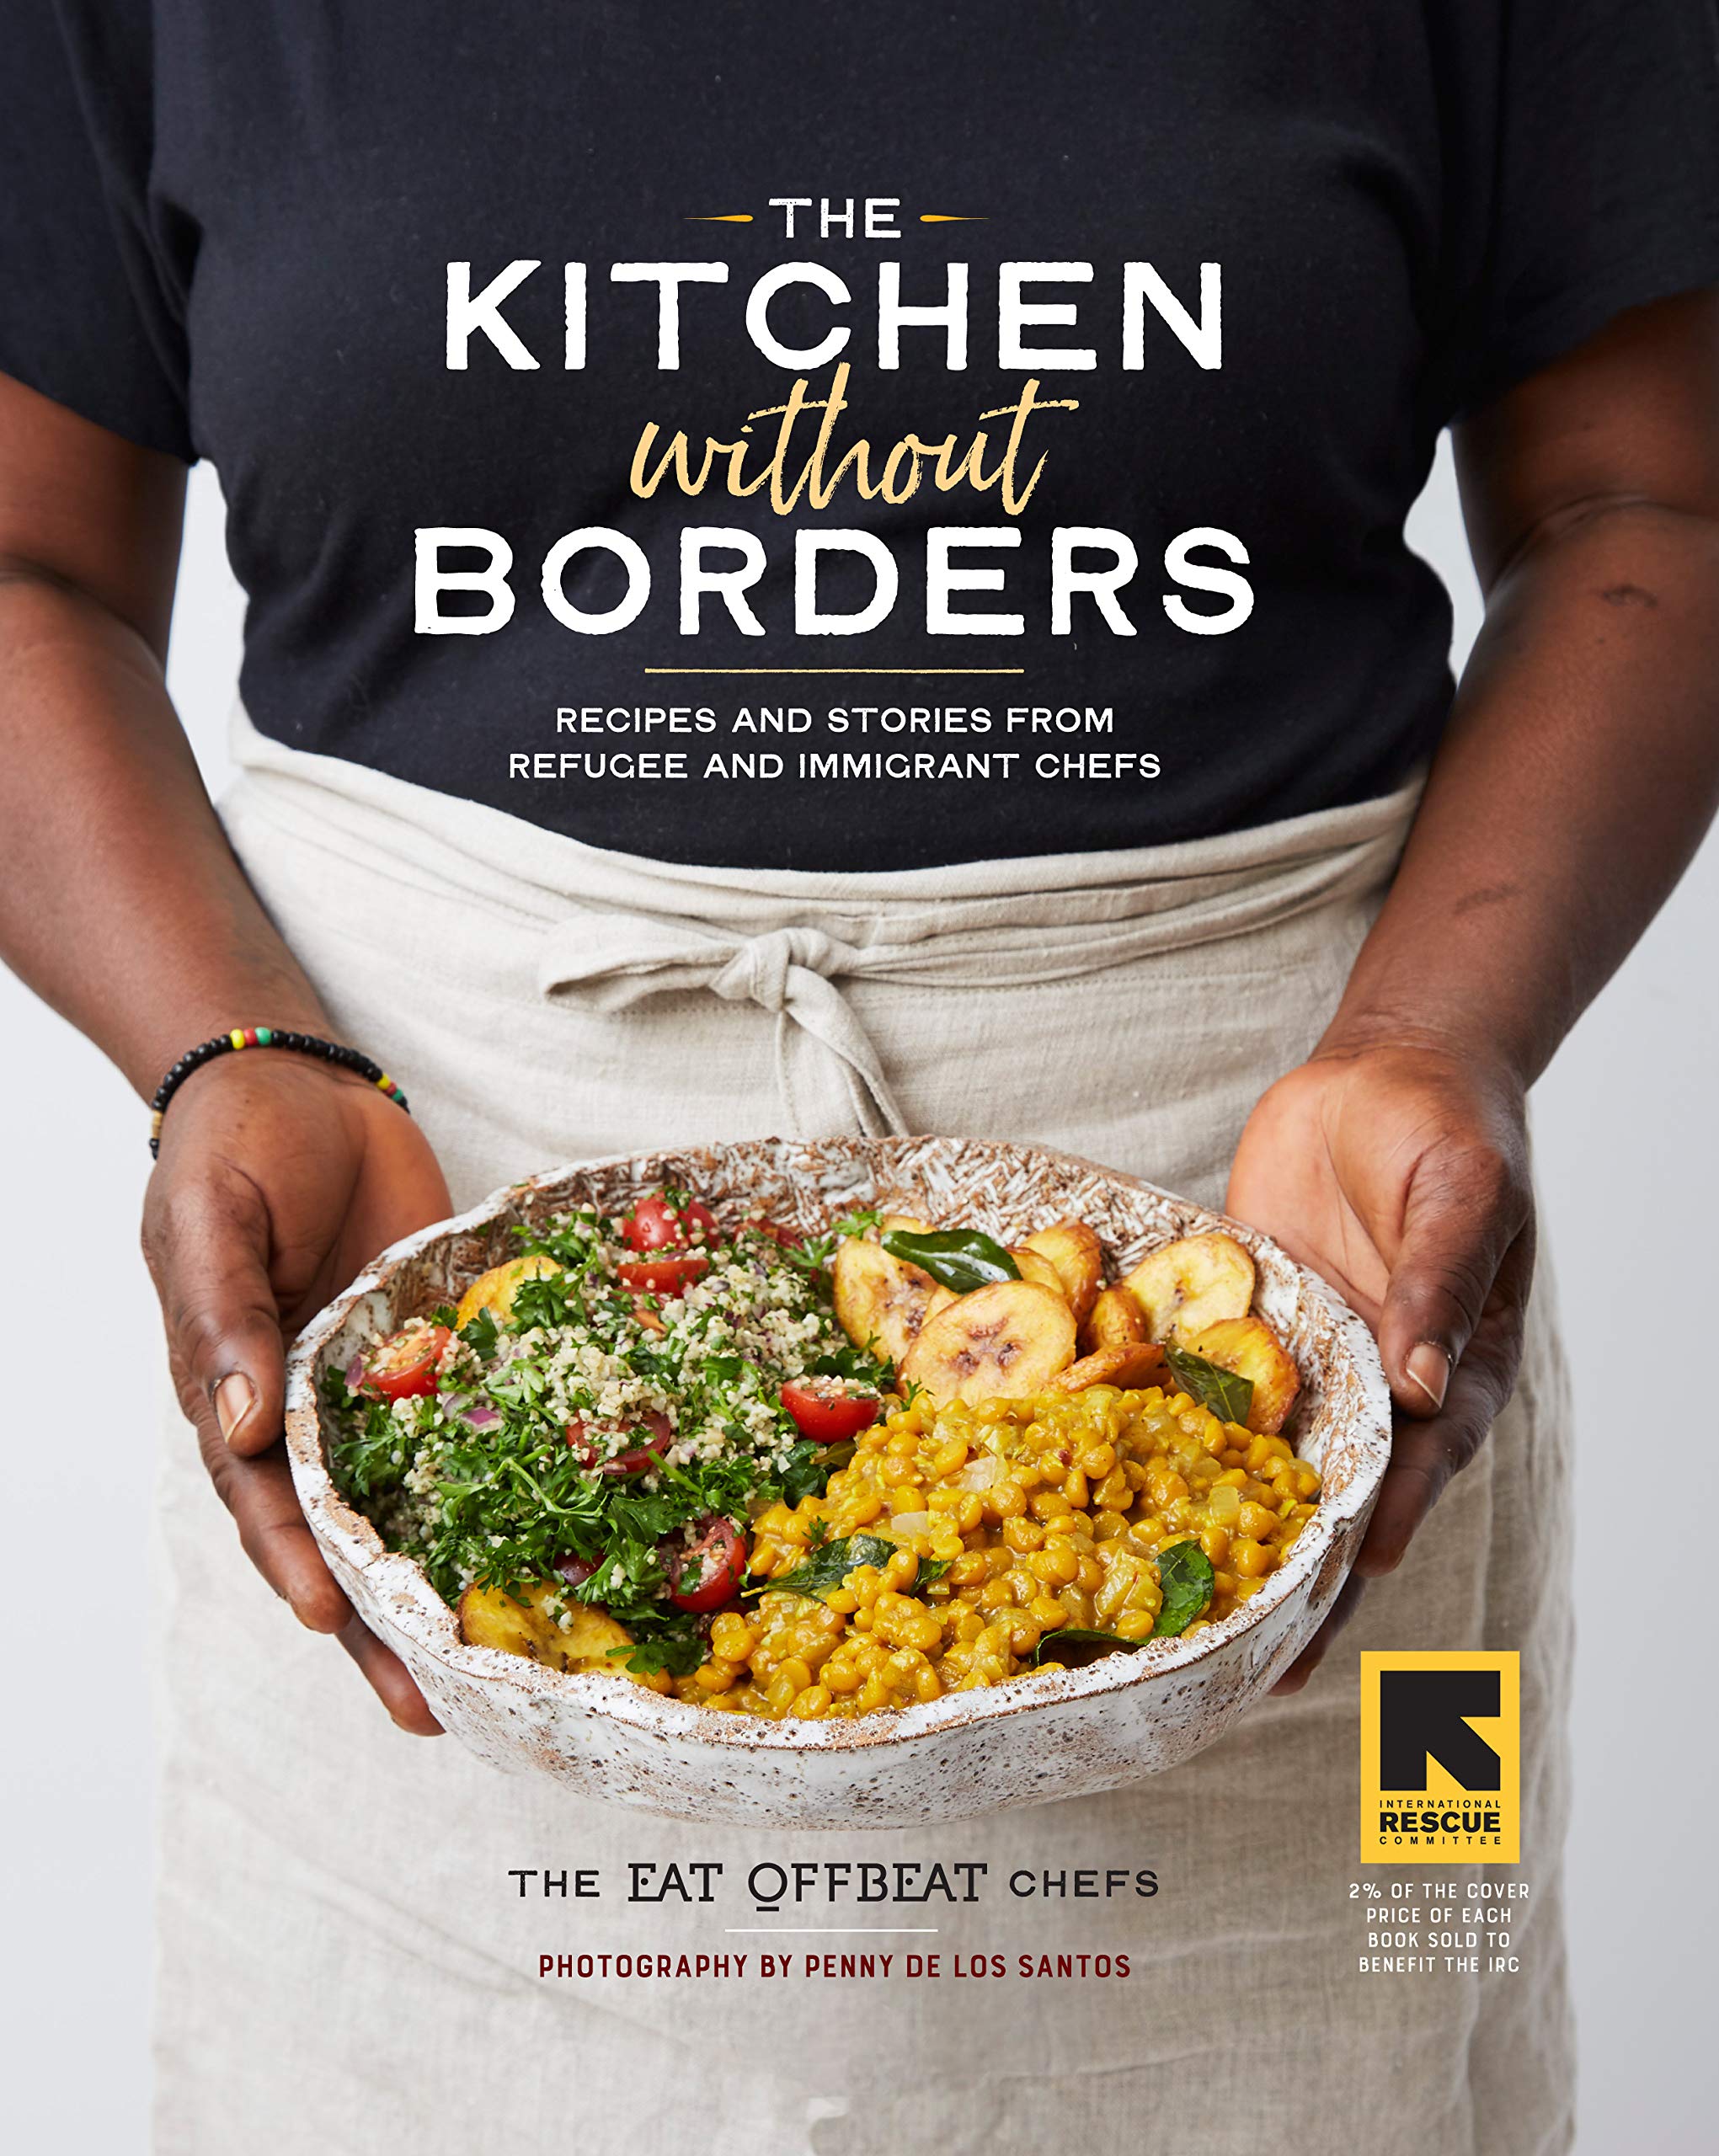 The Kitchen without Borders: Recipes and Stories from Refugee and Immigrant Chefs (Eat Offbeat Chefs)